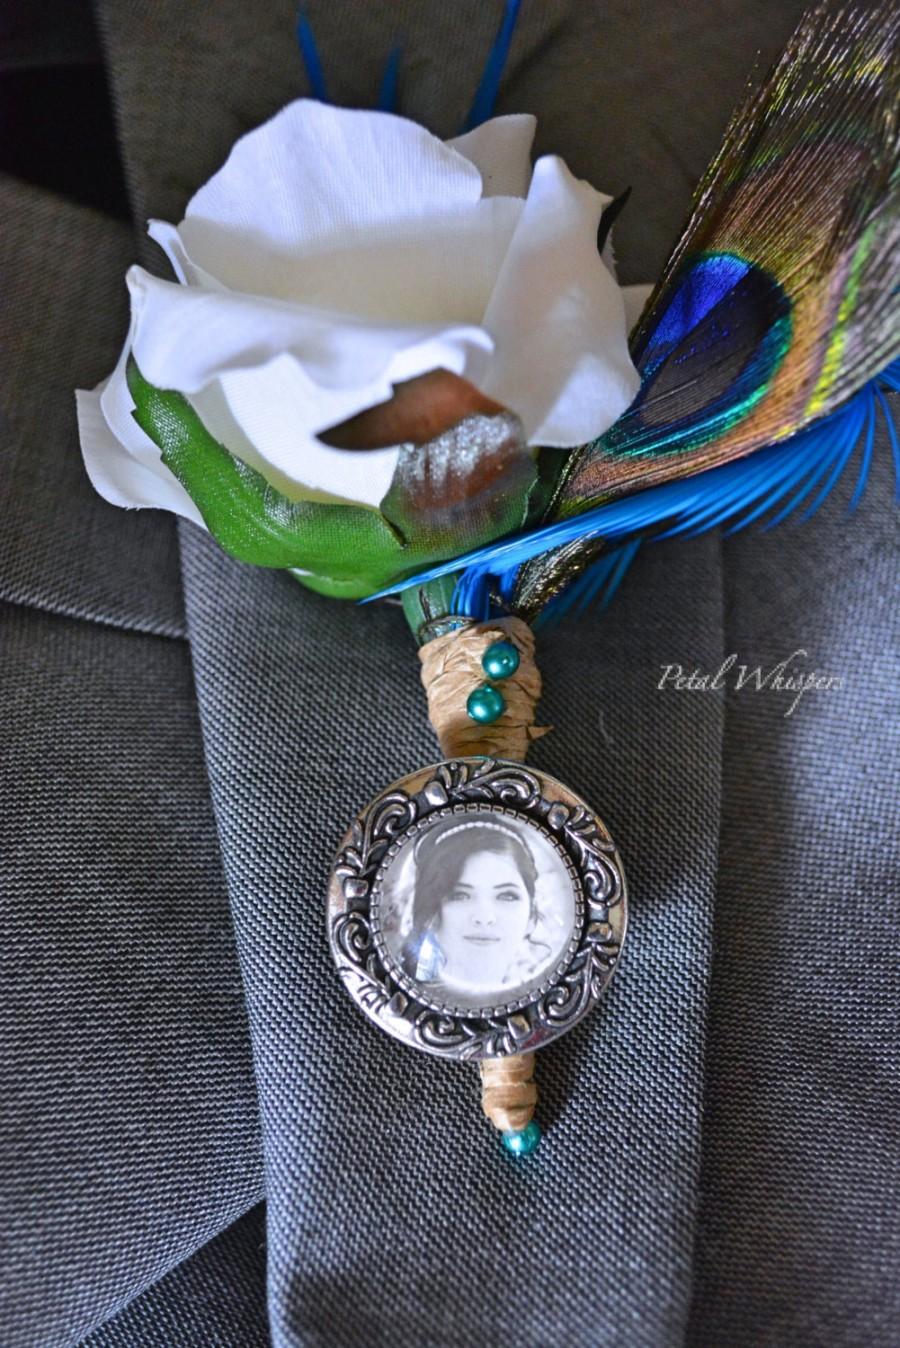 Mariage - Grooms Boutonniere Pendant, Memorial Pin, Grooms Gift, Bouquet Photo Brooch, Lapel Pin, Wedding Memory Pendant Brooch, Boutonniere Pendant